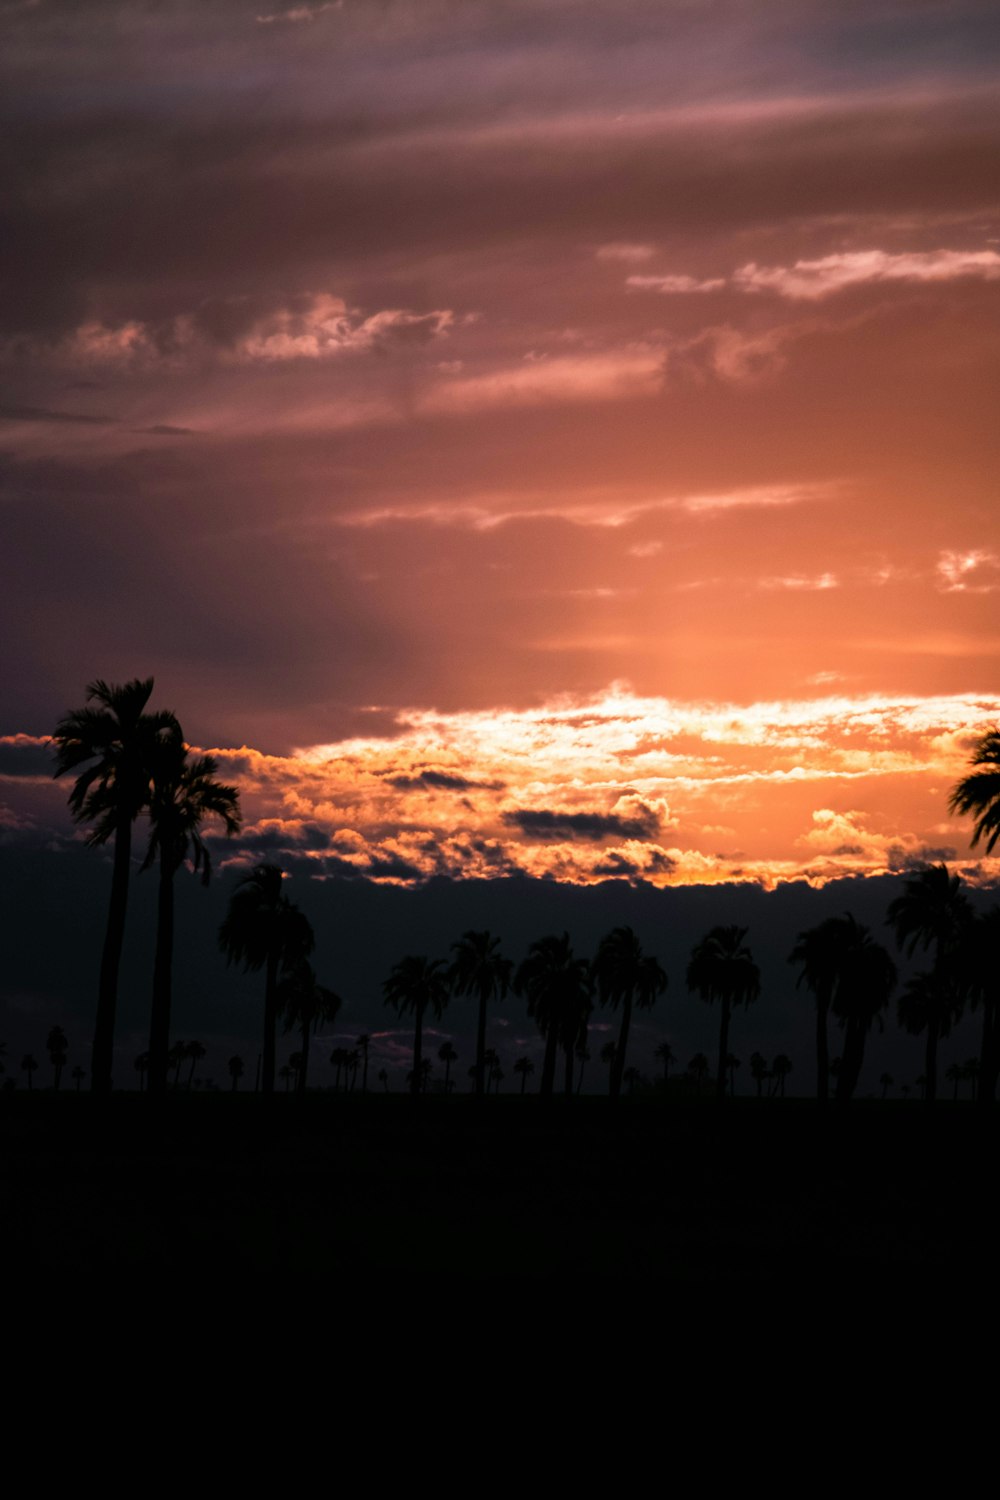 palm trees under cloudy sky during sunset